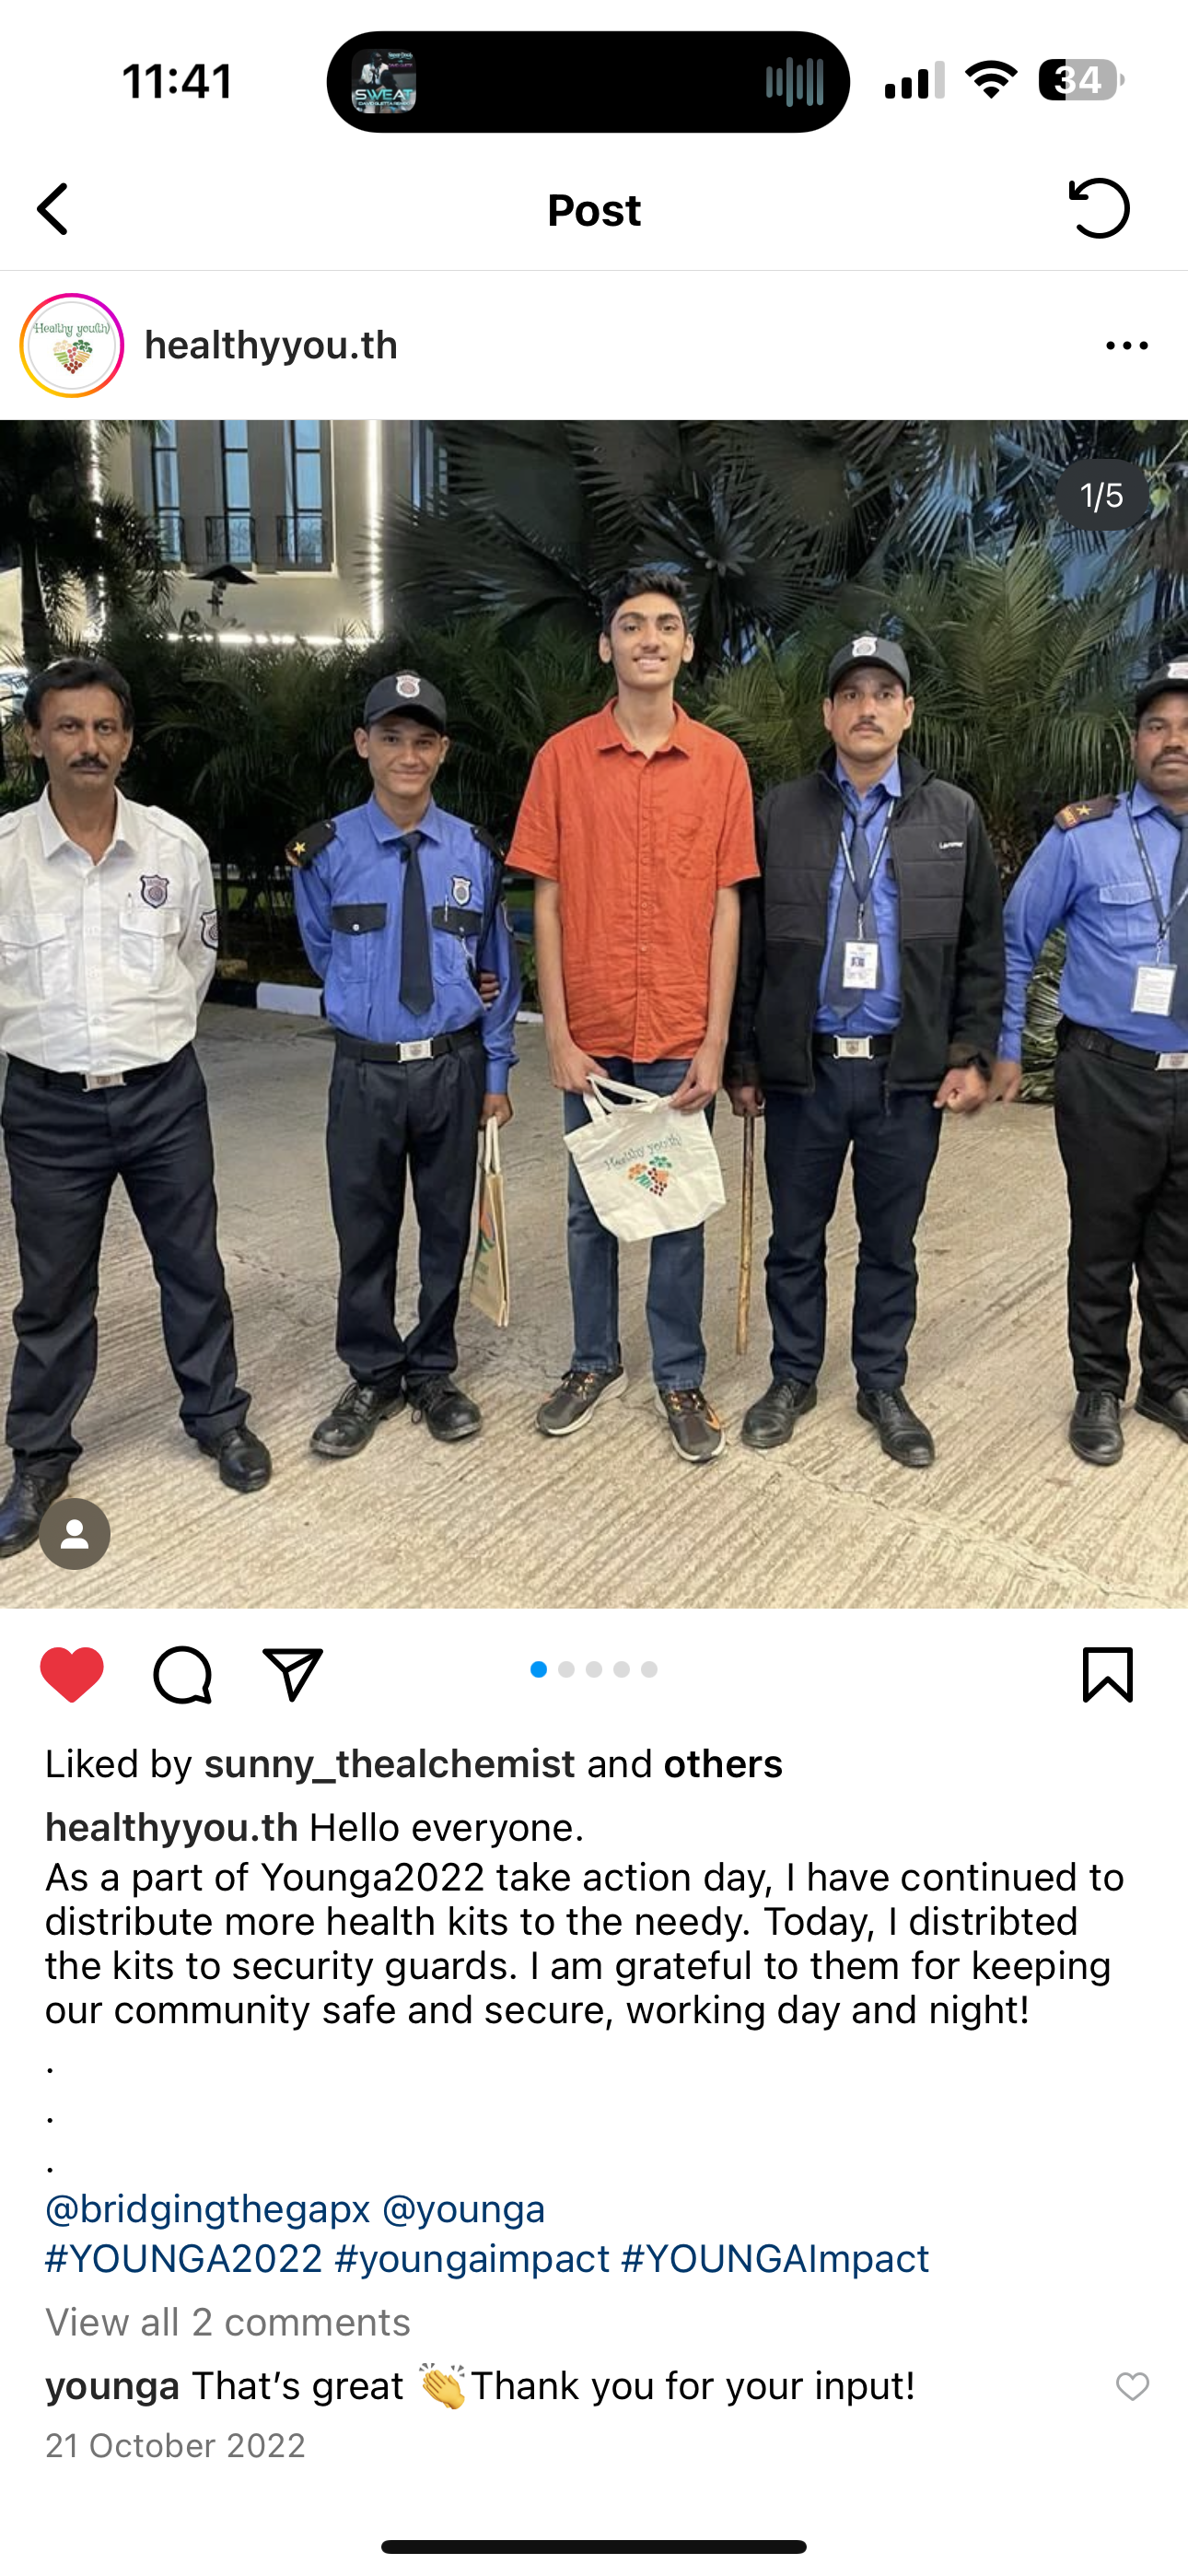 healthyyou.th on instagram sharing their experiencie on younga 2022: "Hello everyone. As a part of Younga2022 take action day, I have continued to distribute more health kits to the needy. Today, I distributed the kits to security guards. I am grateful to them for keeping our community safe and secure, working day and night!"